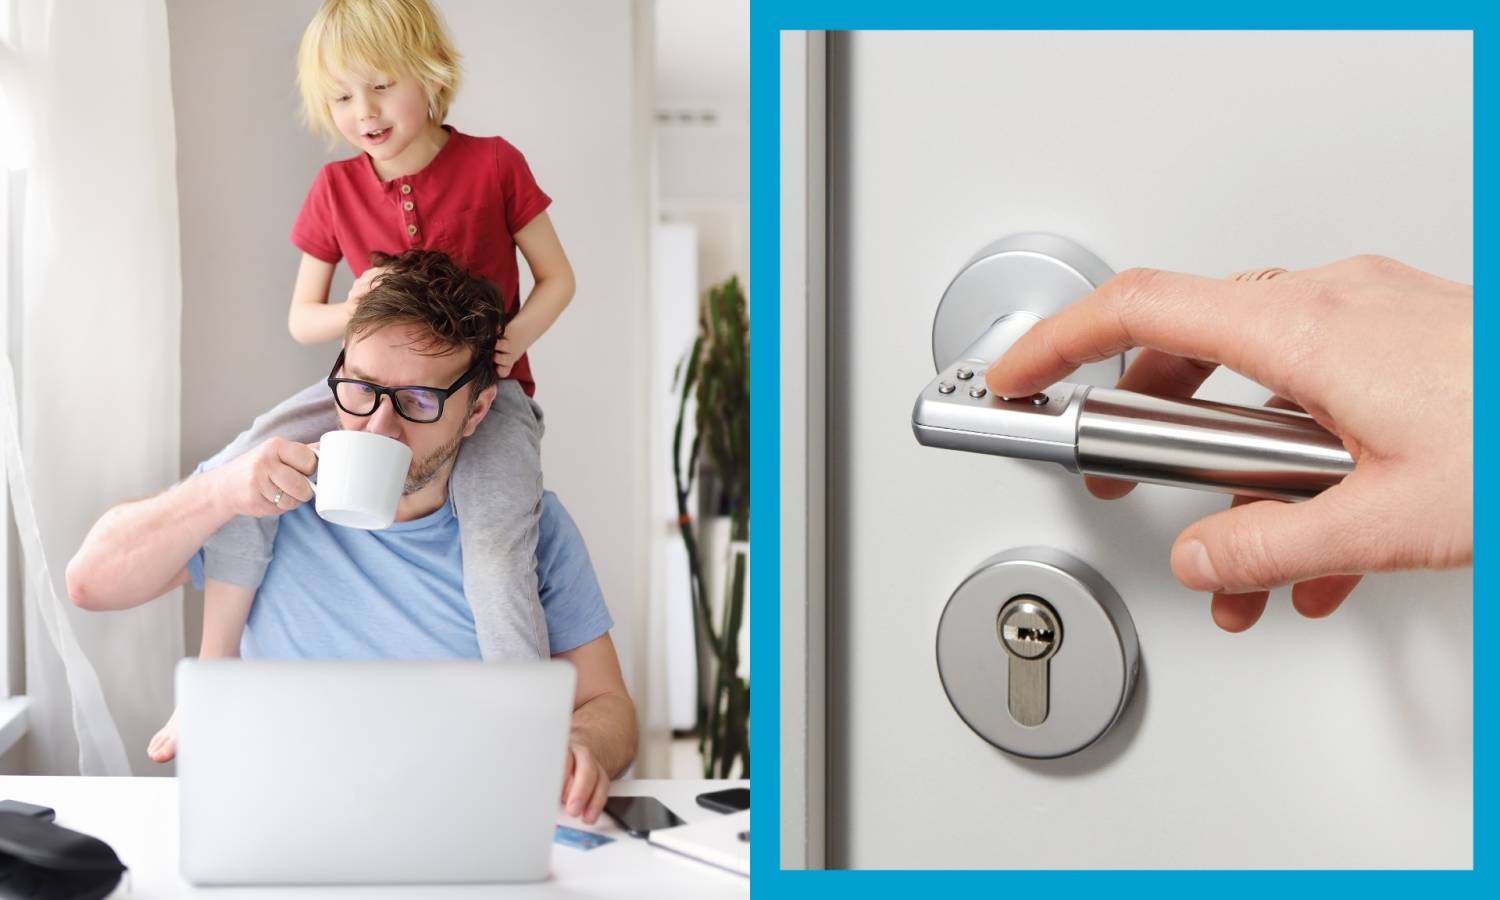 One simple door upgrade ensures a home office is private and secure